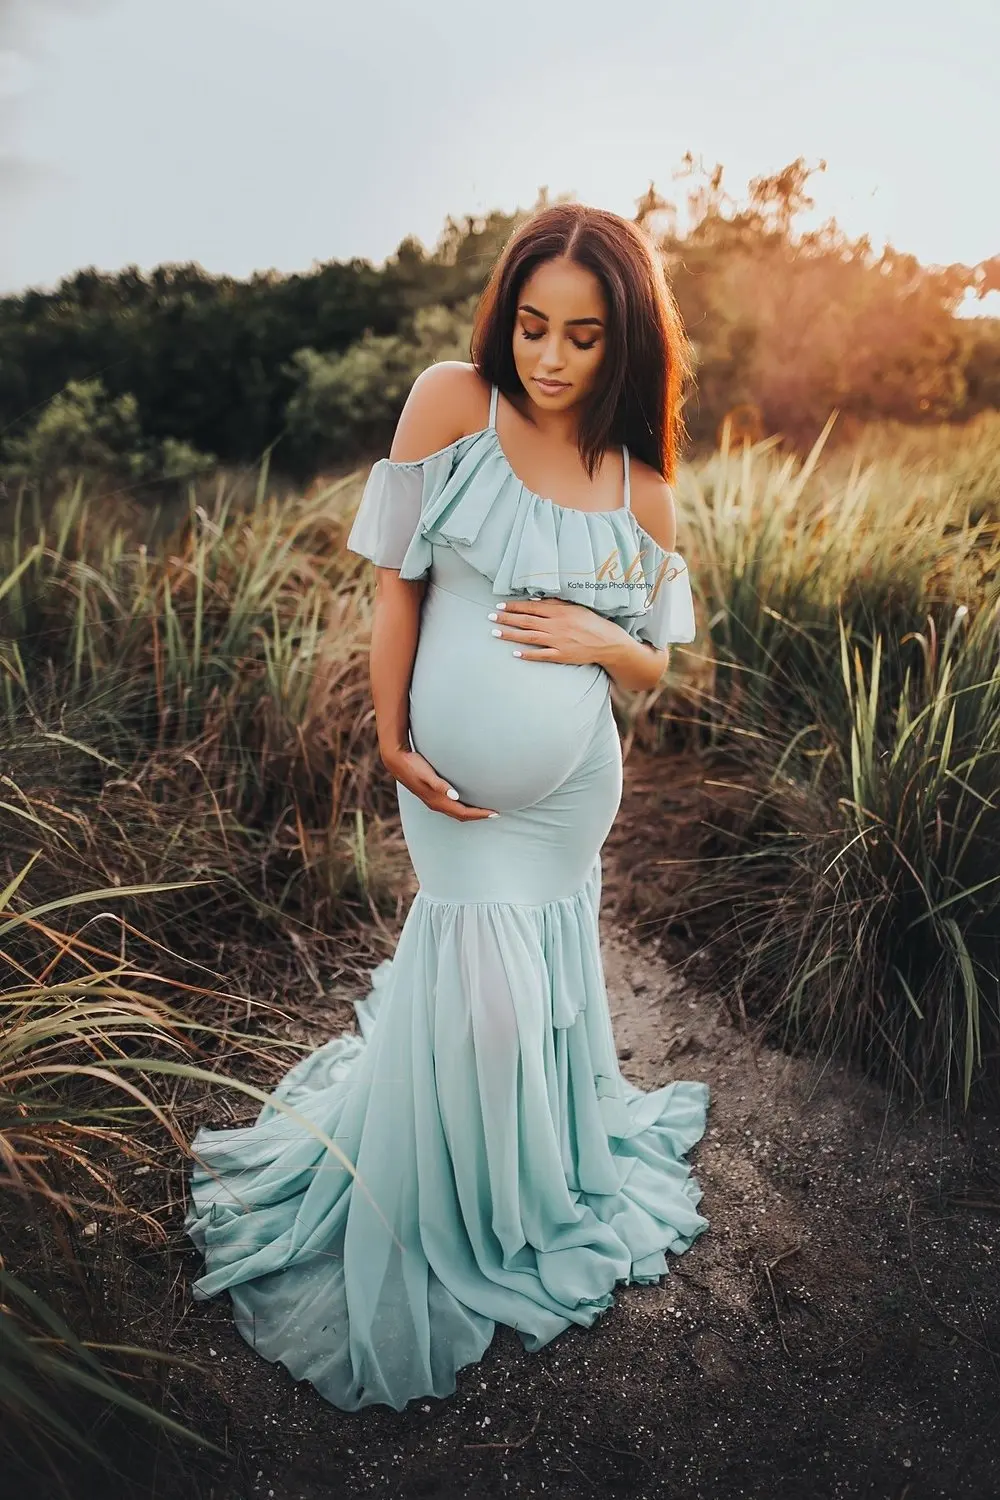 2019 Mermaid Maternity Dresses For Photo Shoot Chiffon Women Pregnancy Dress Photography Props Sexy Off Shoulder Maternity Gown (5)